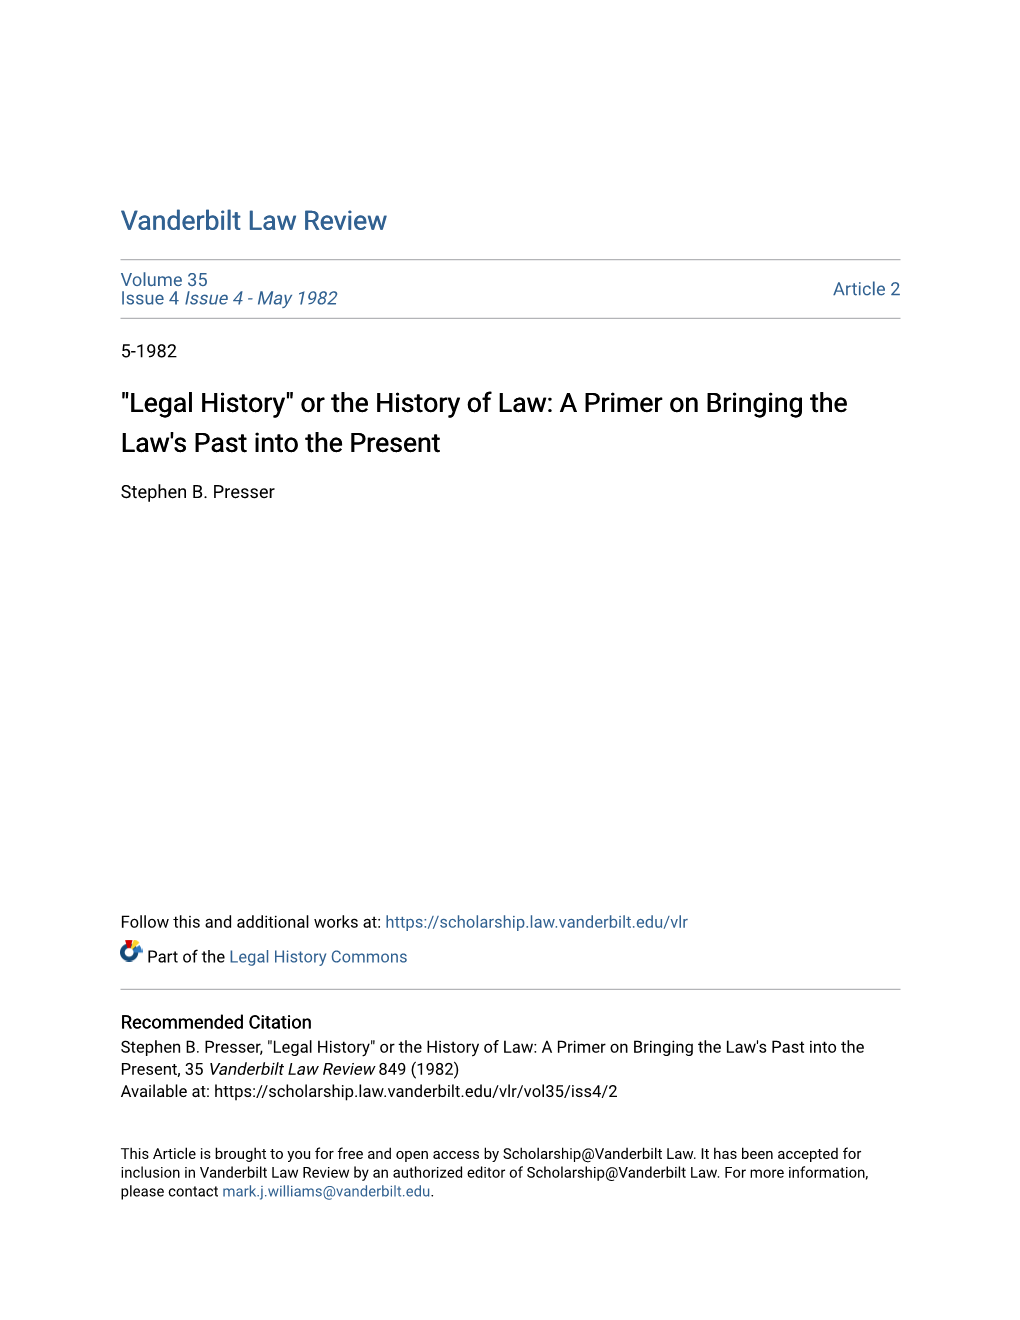 Legal History" Or the History of Law: a Primer on Bringing the Law's Past Into the Present